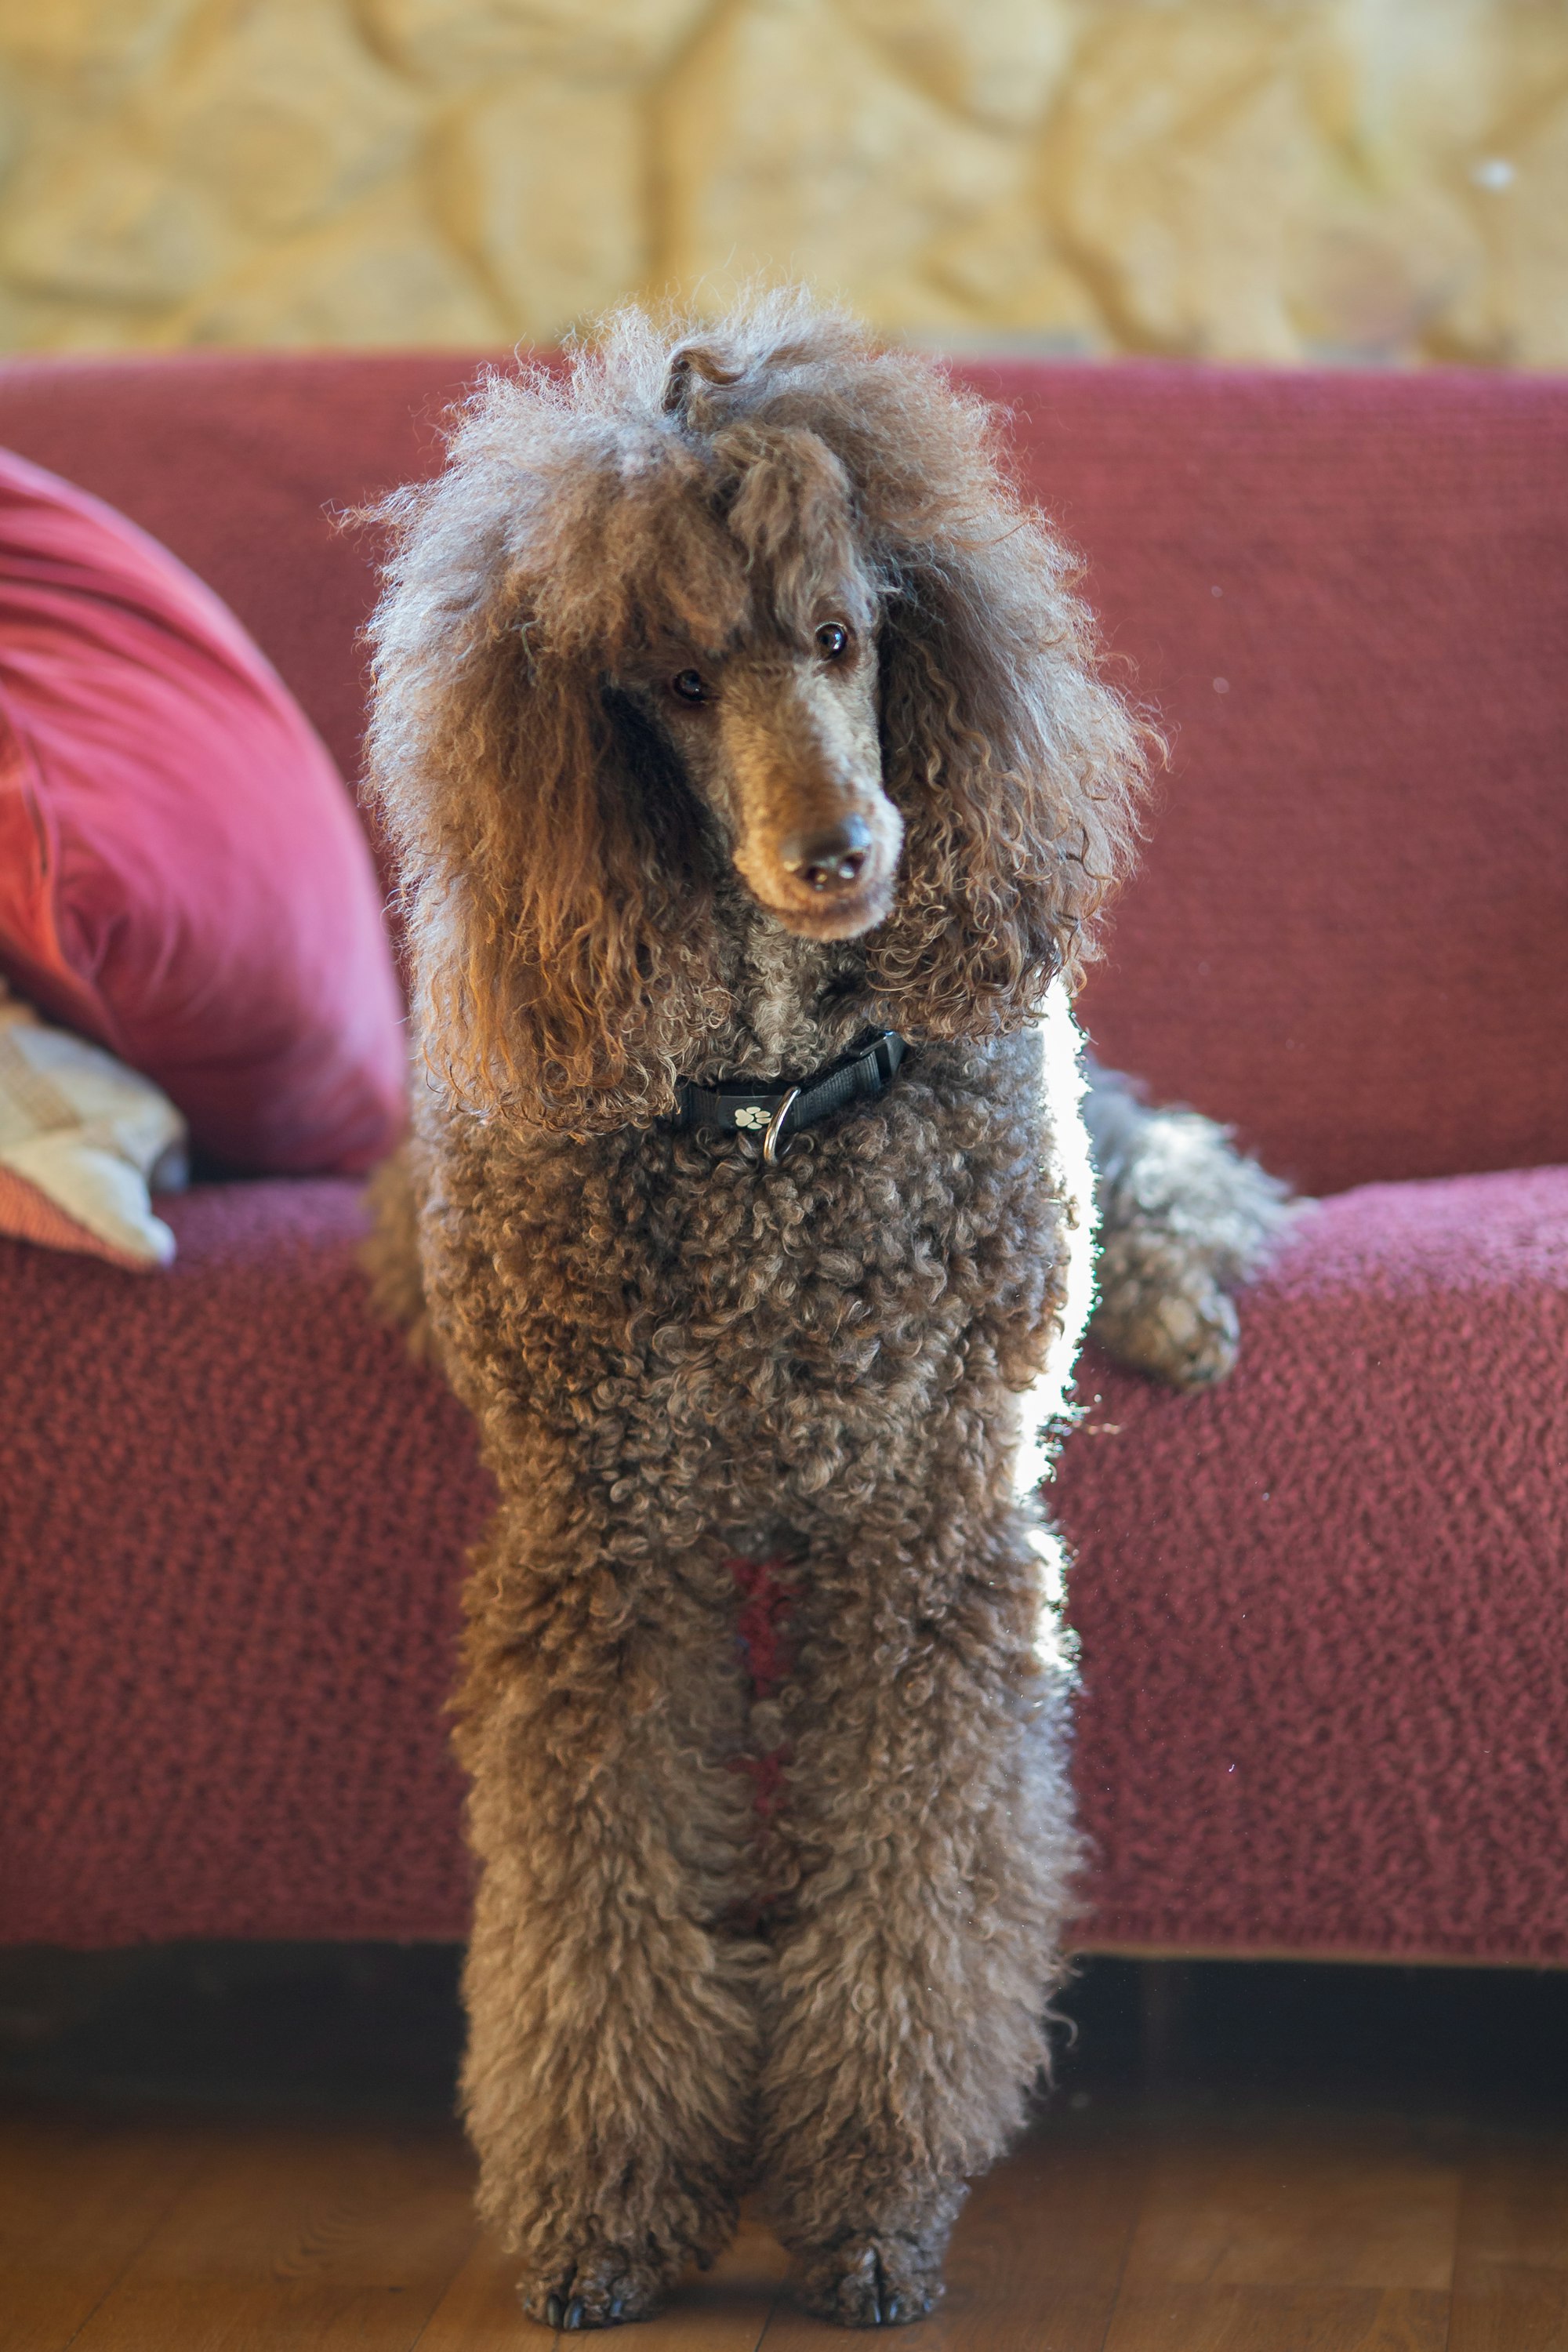 Poodle hanging off couch